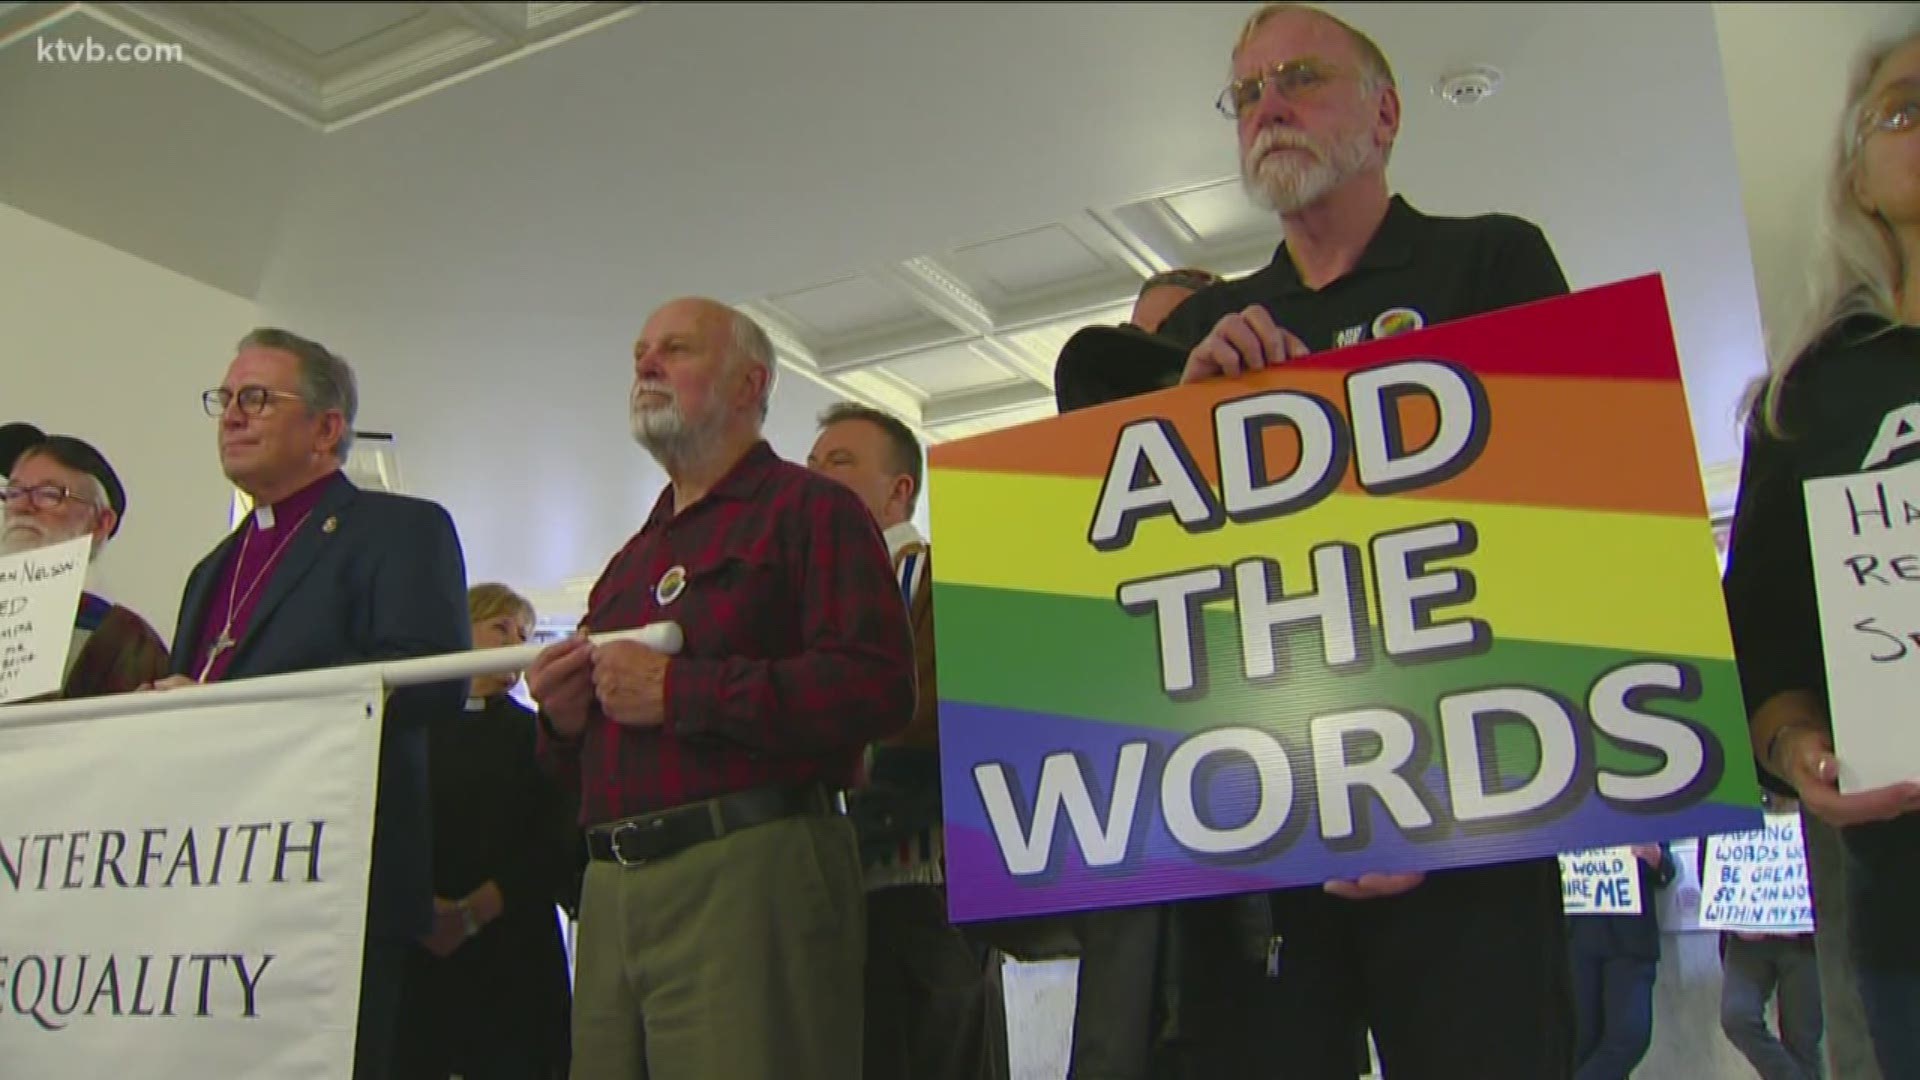 The legislation would add four words to the Idaho Human Rights Act.